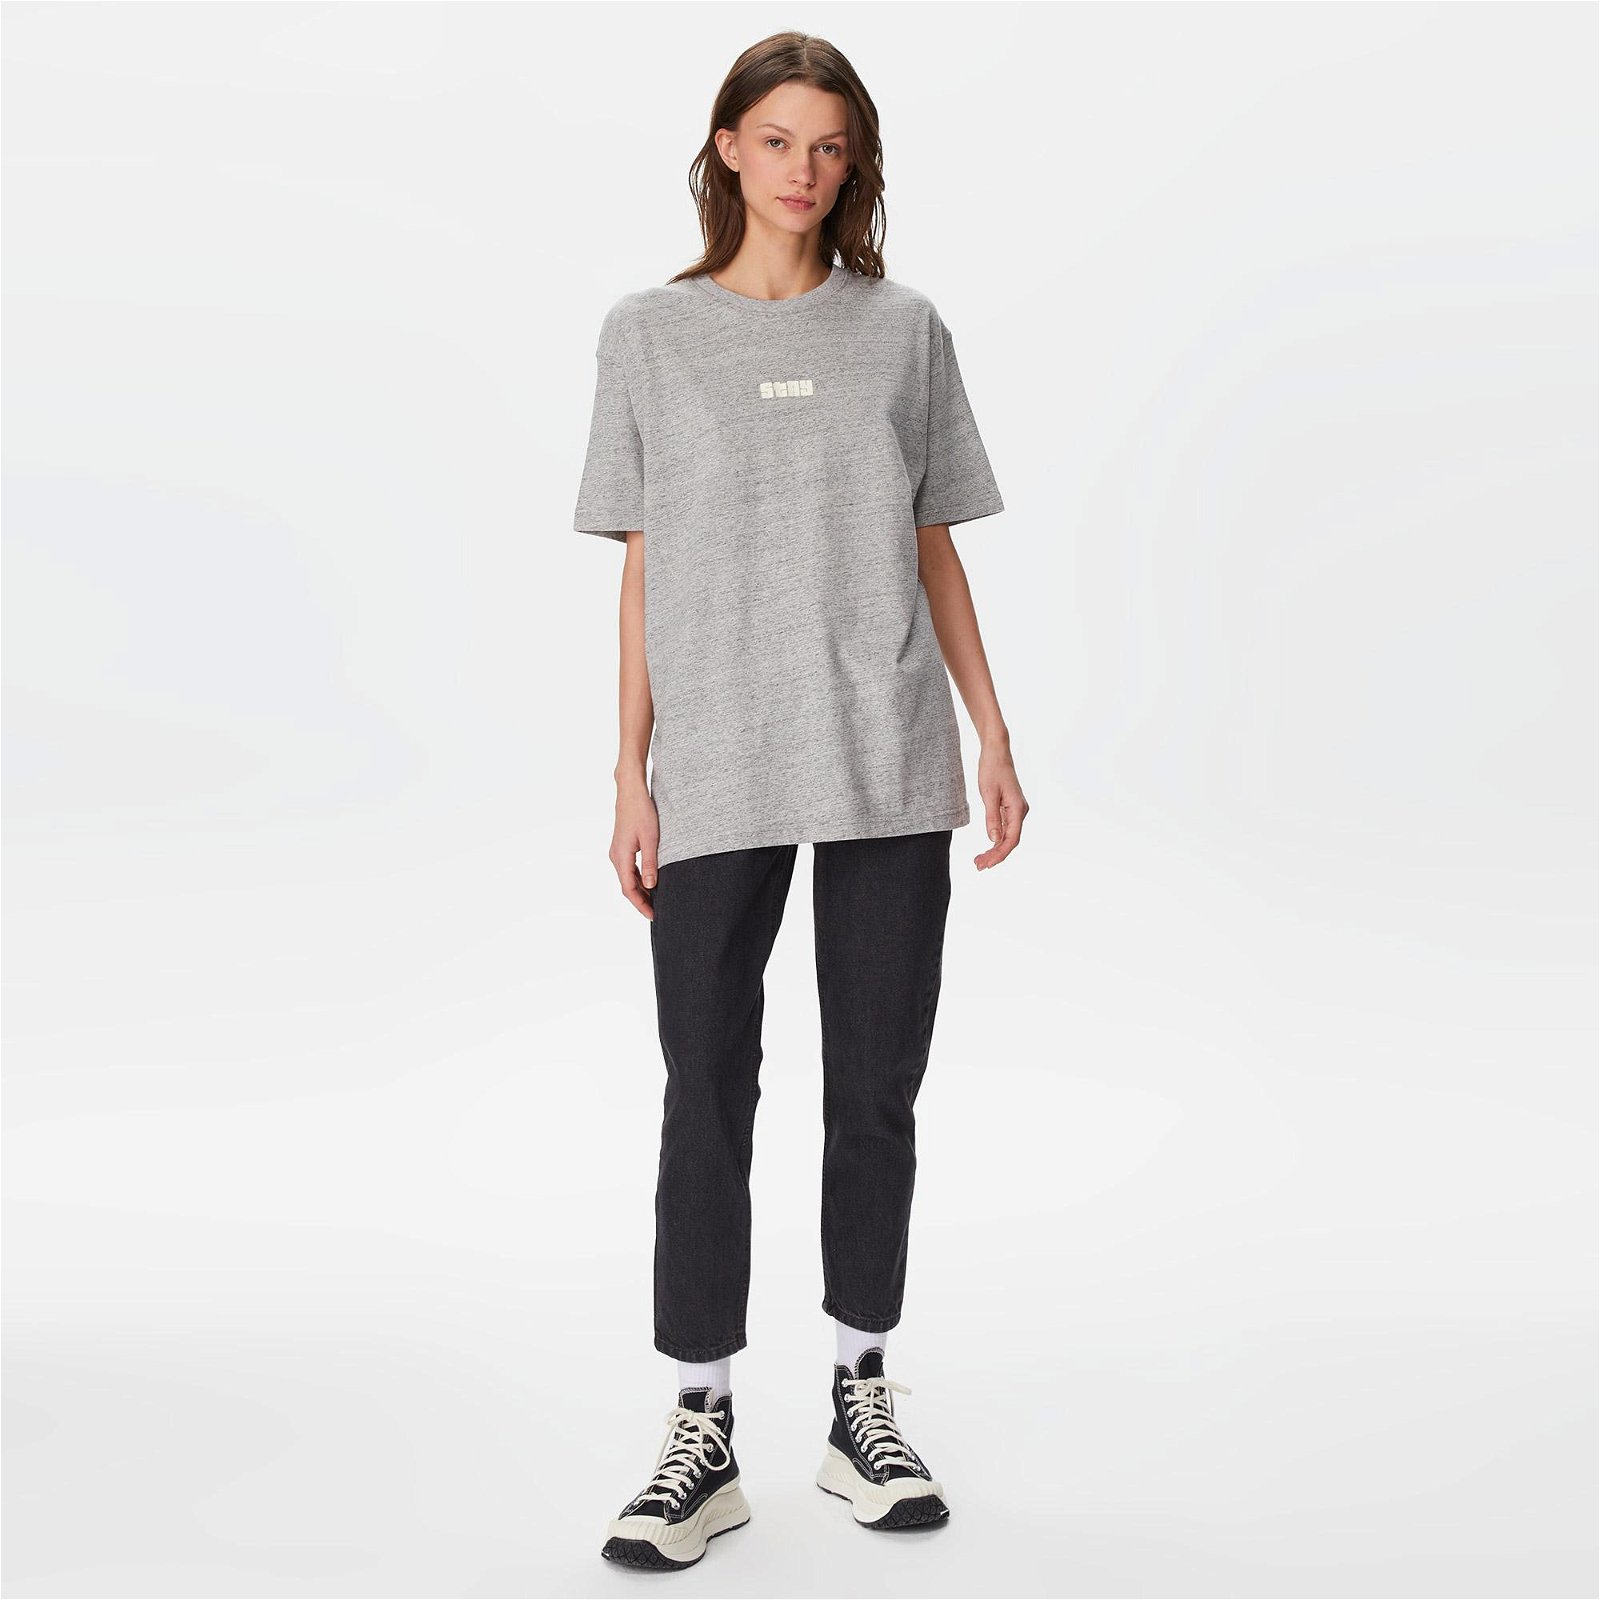 The Stay Line Epic Unisex Gri T-Shirt